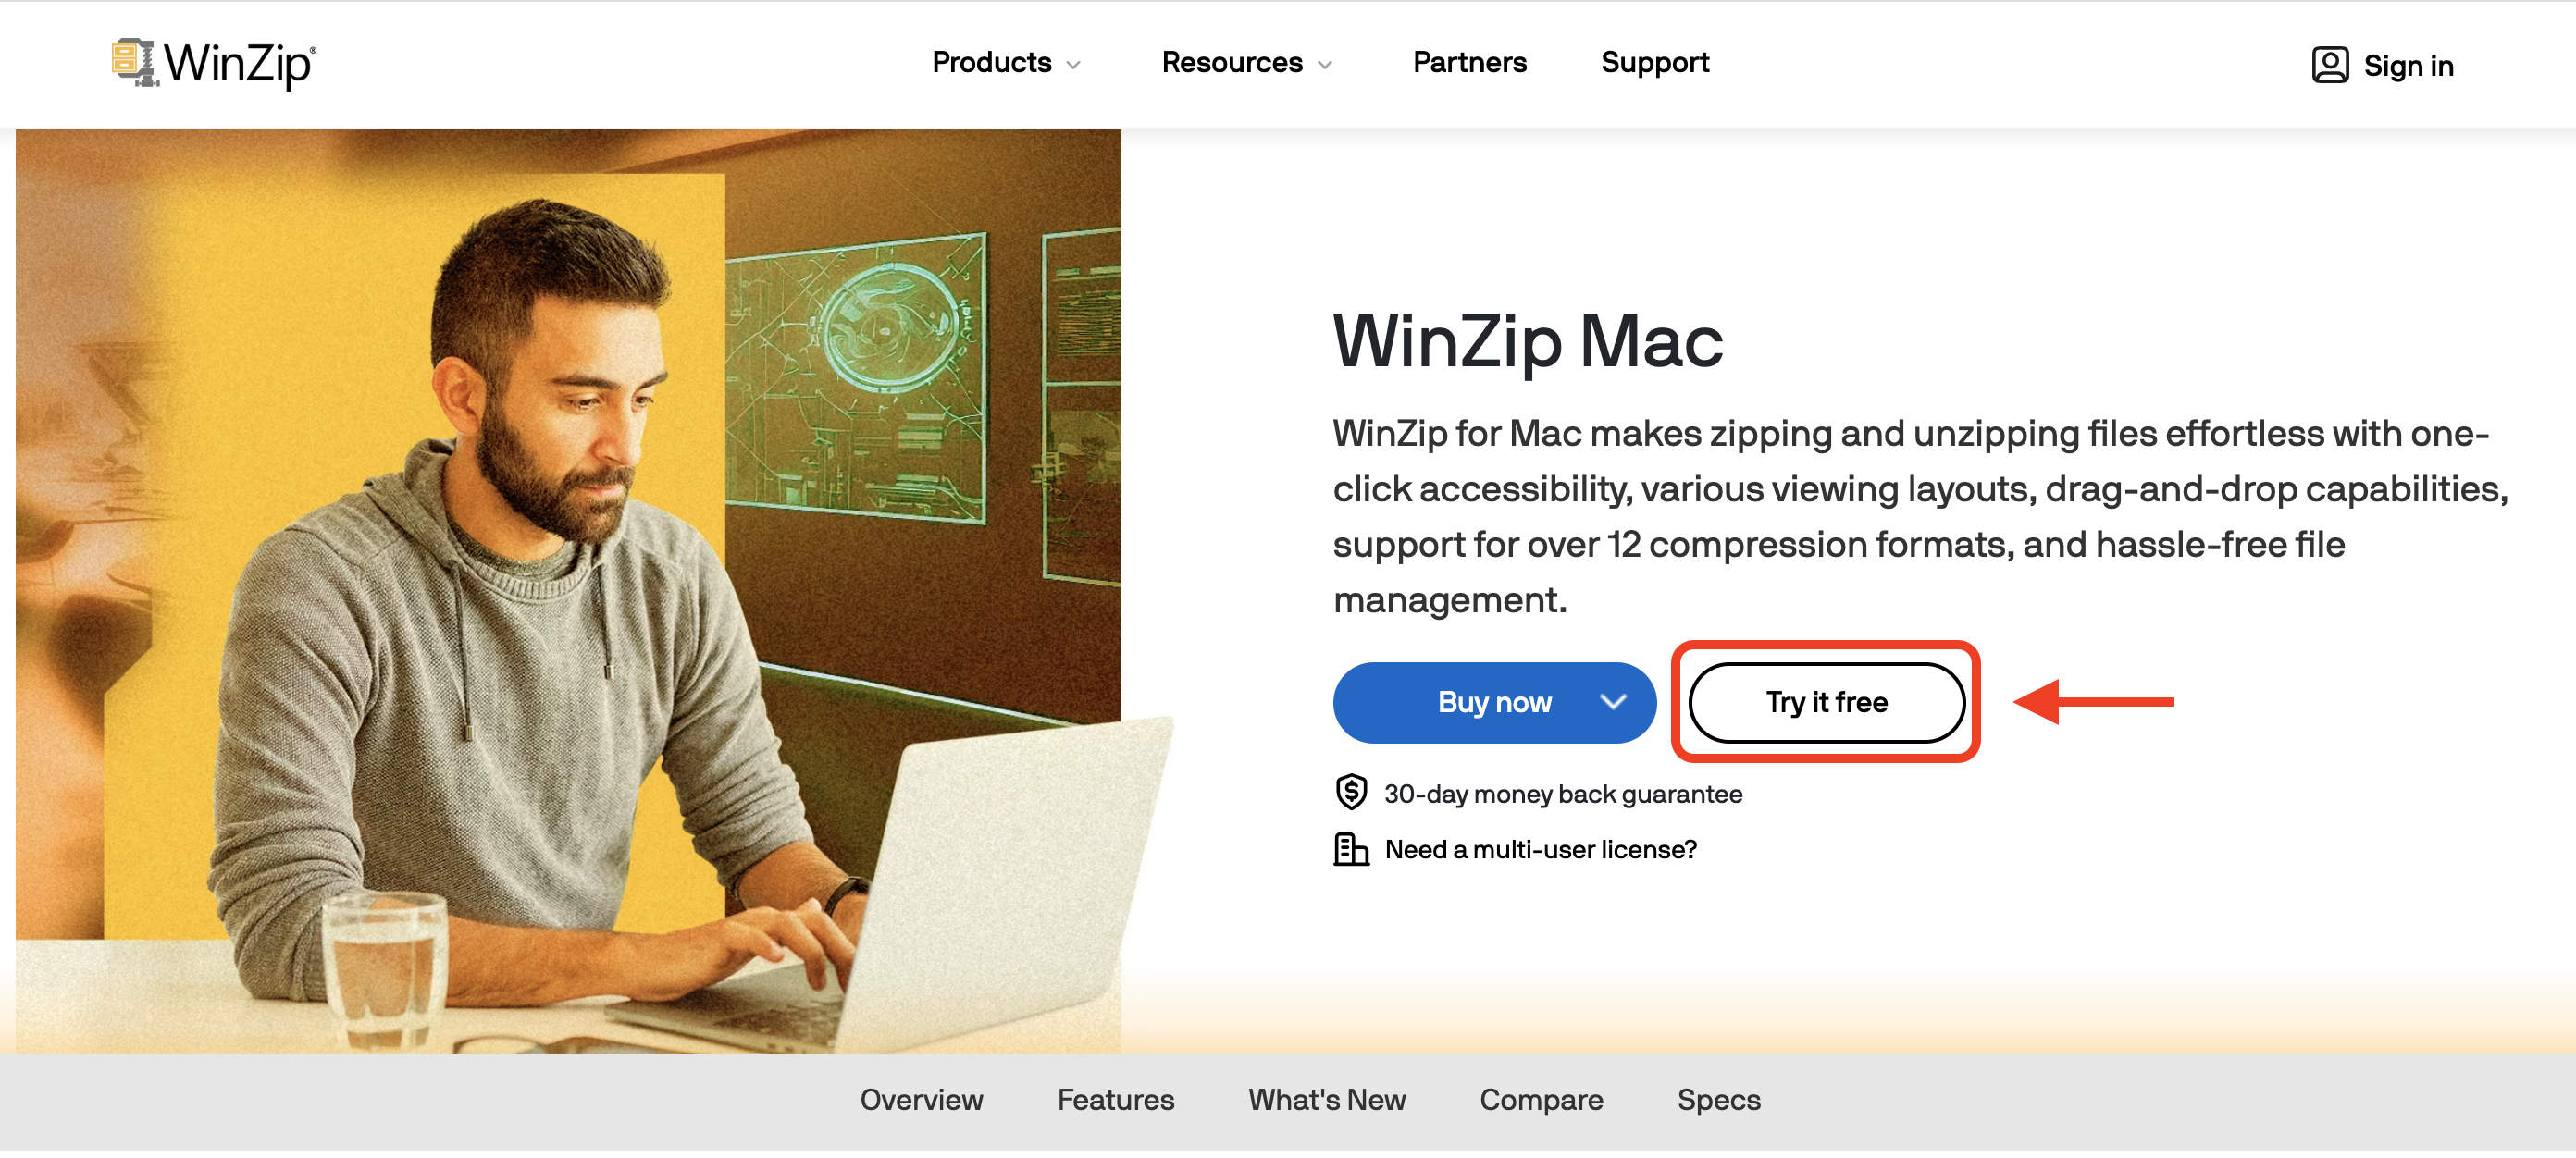 How To Install WinZip on Mac: Step 1